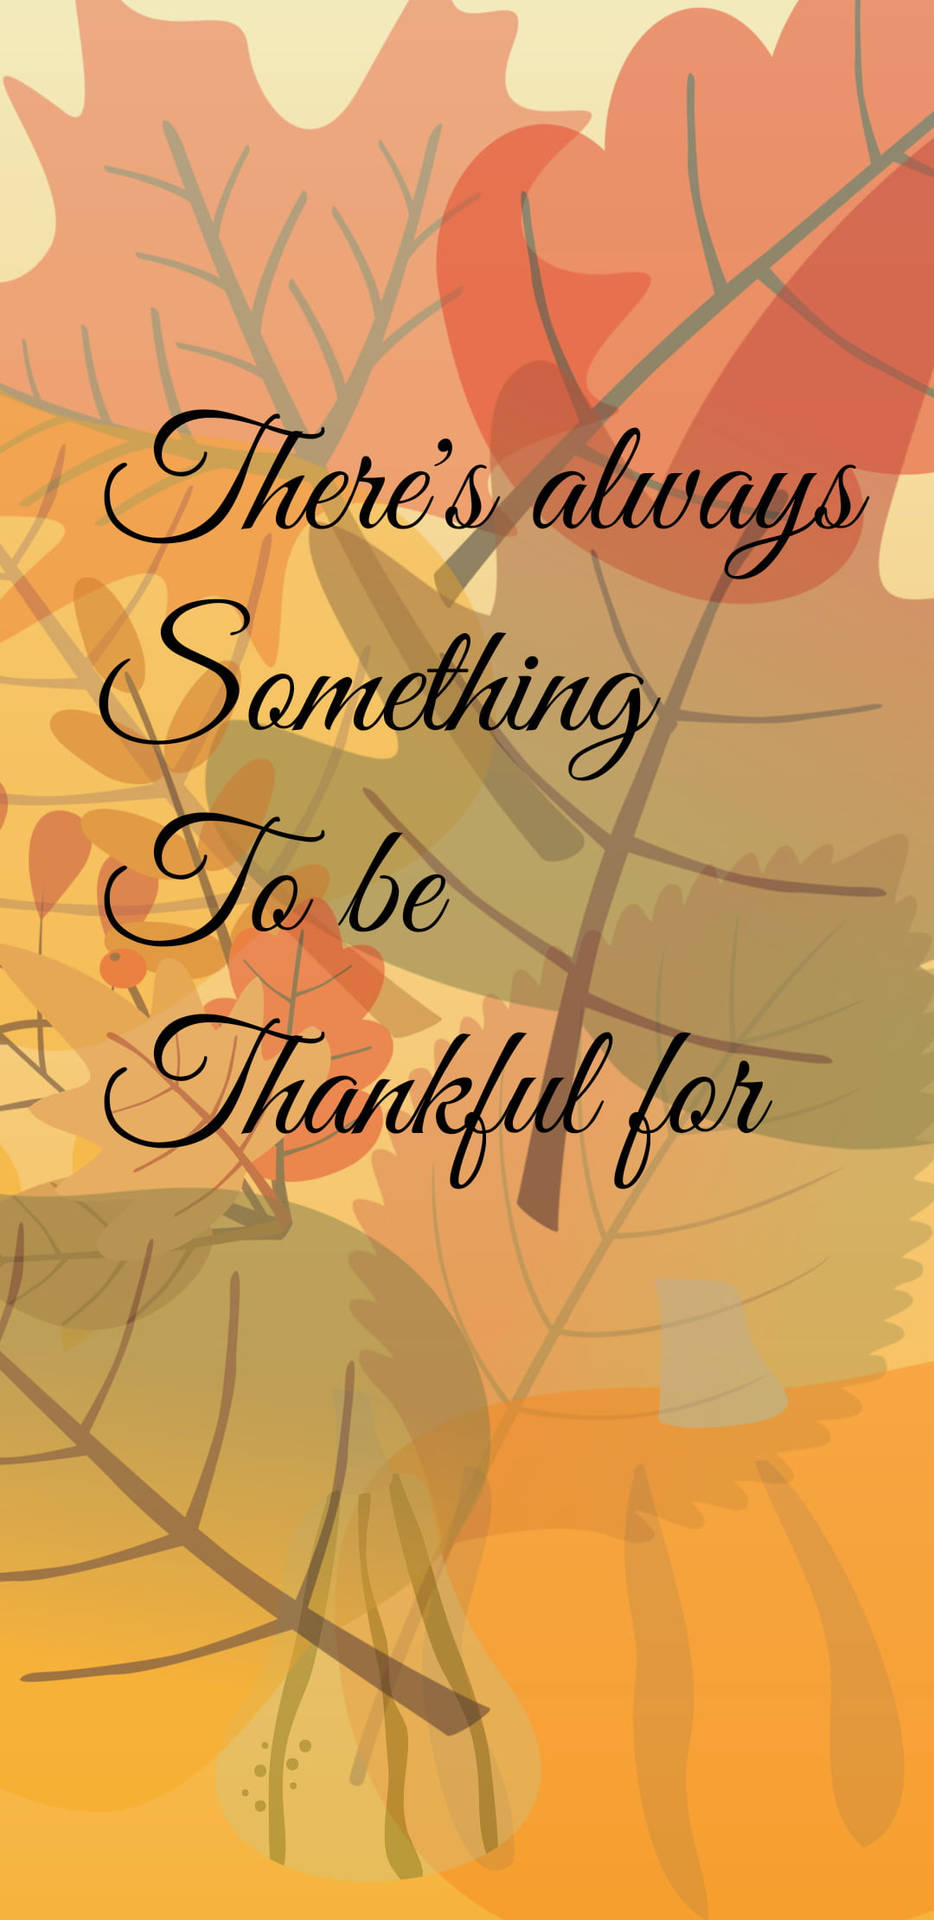 Thanksgiving Greeting With Autumn Leaves Iphone Background